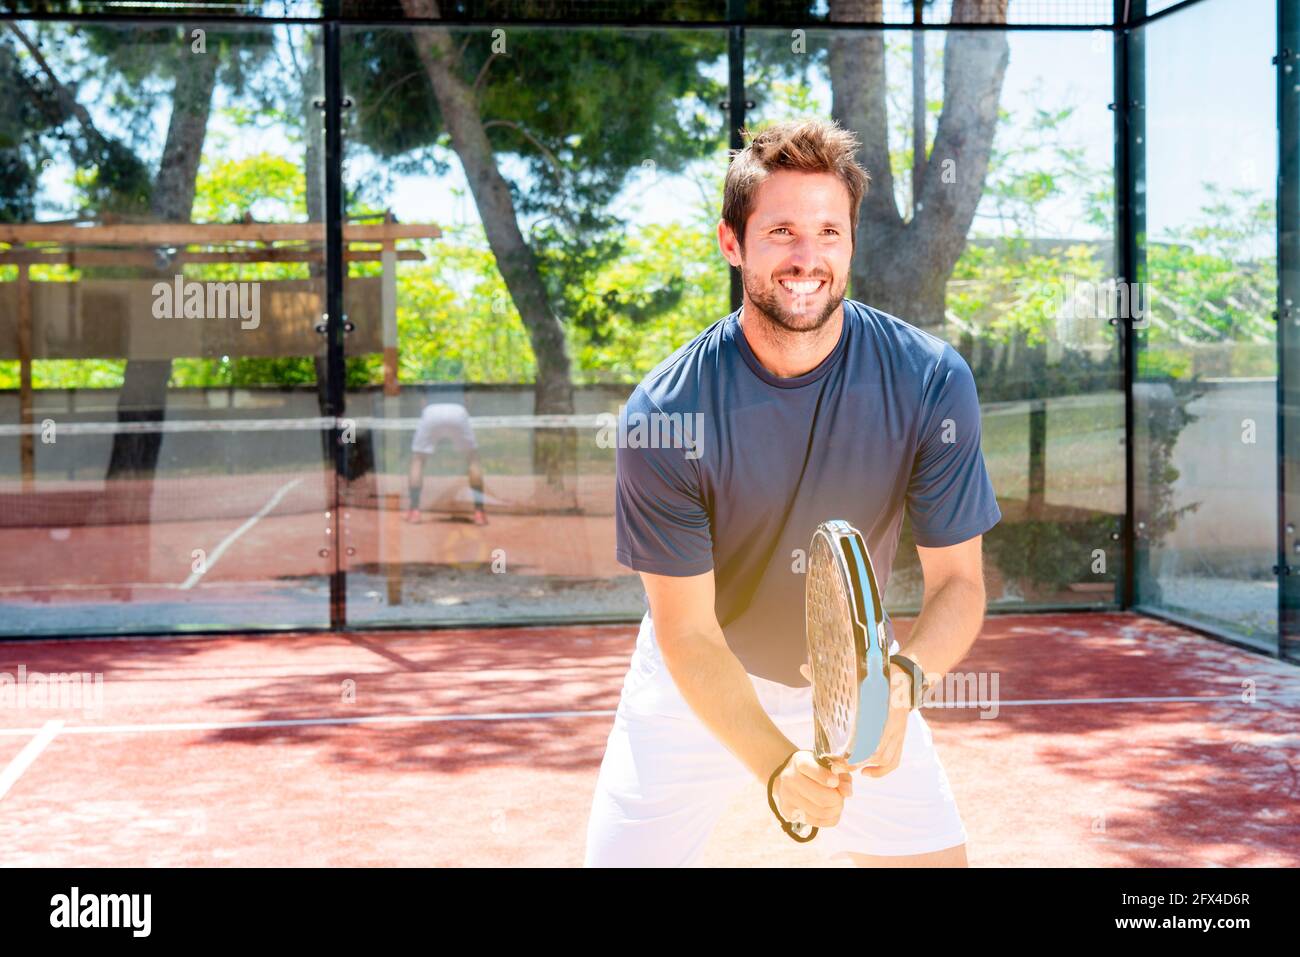 young guy plays padel tennis outdoor summer sport court getting fit Stock Photo